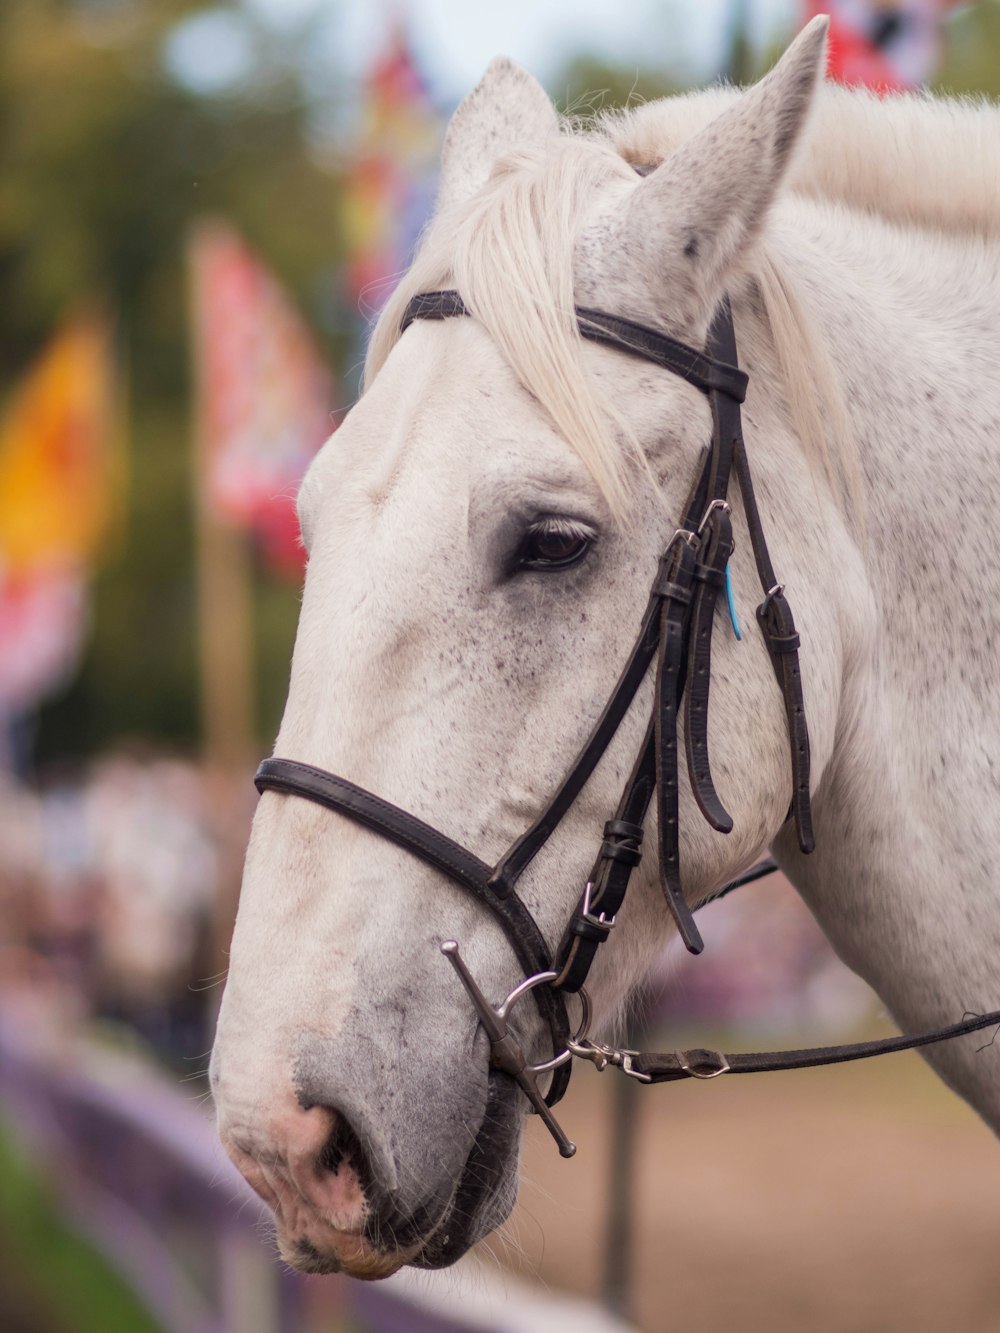 a close up of a white horse with a black bridle